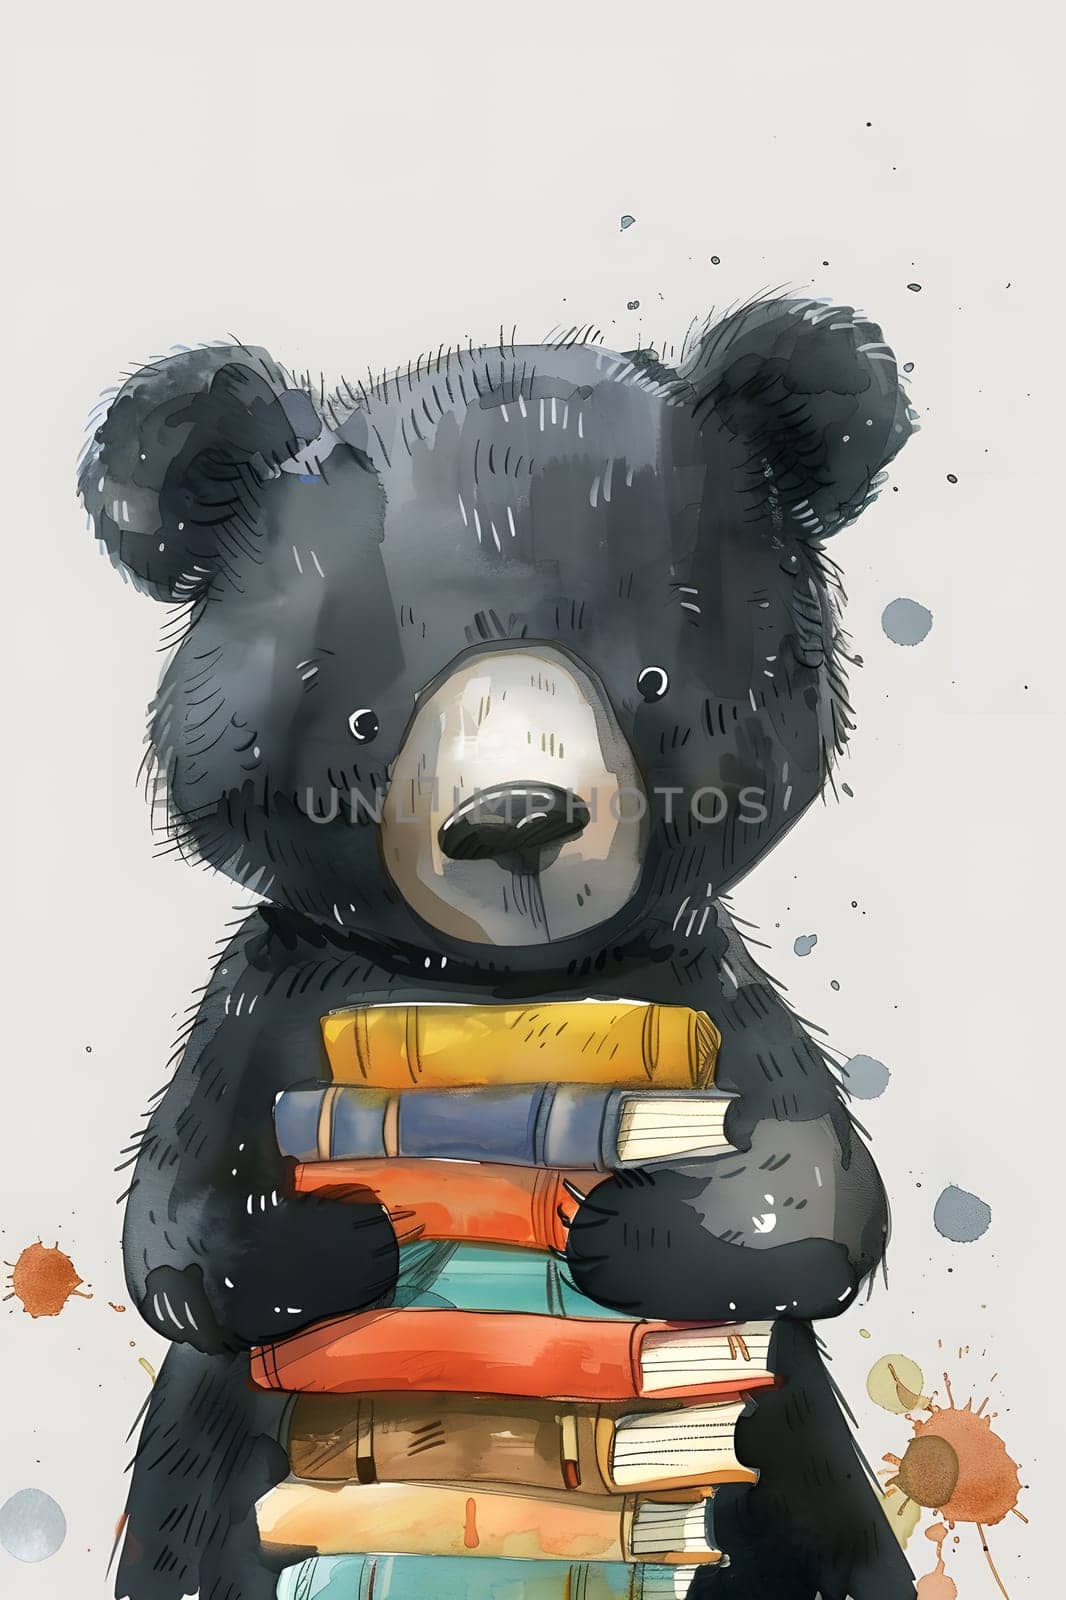 A black bear toy is making a gesture of holding a stack of books with its snout. The animal figure, with its fur, looks like an illustration of a fictional character in a childrens book